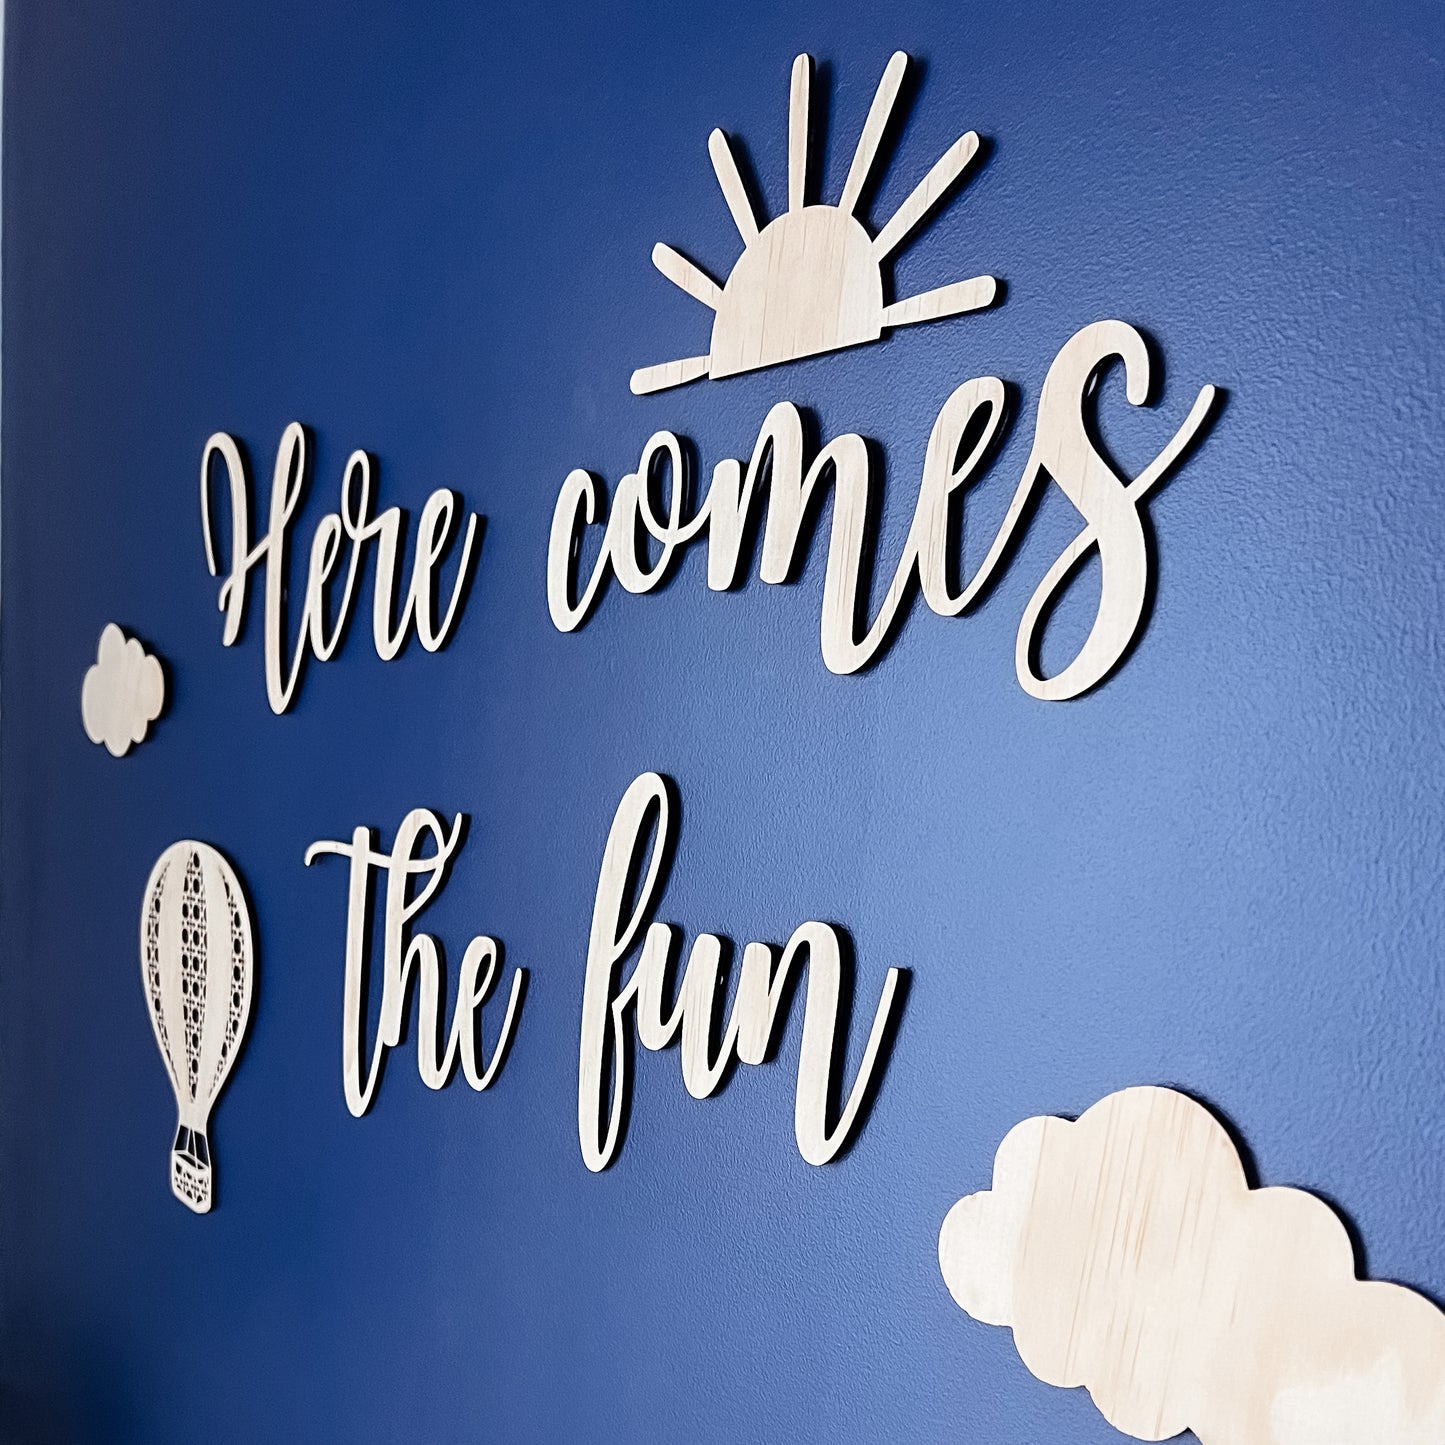 Wooden Wall Script - Here comes the fun